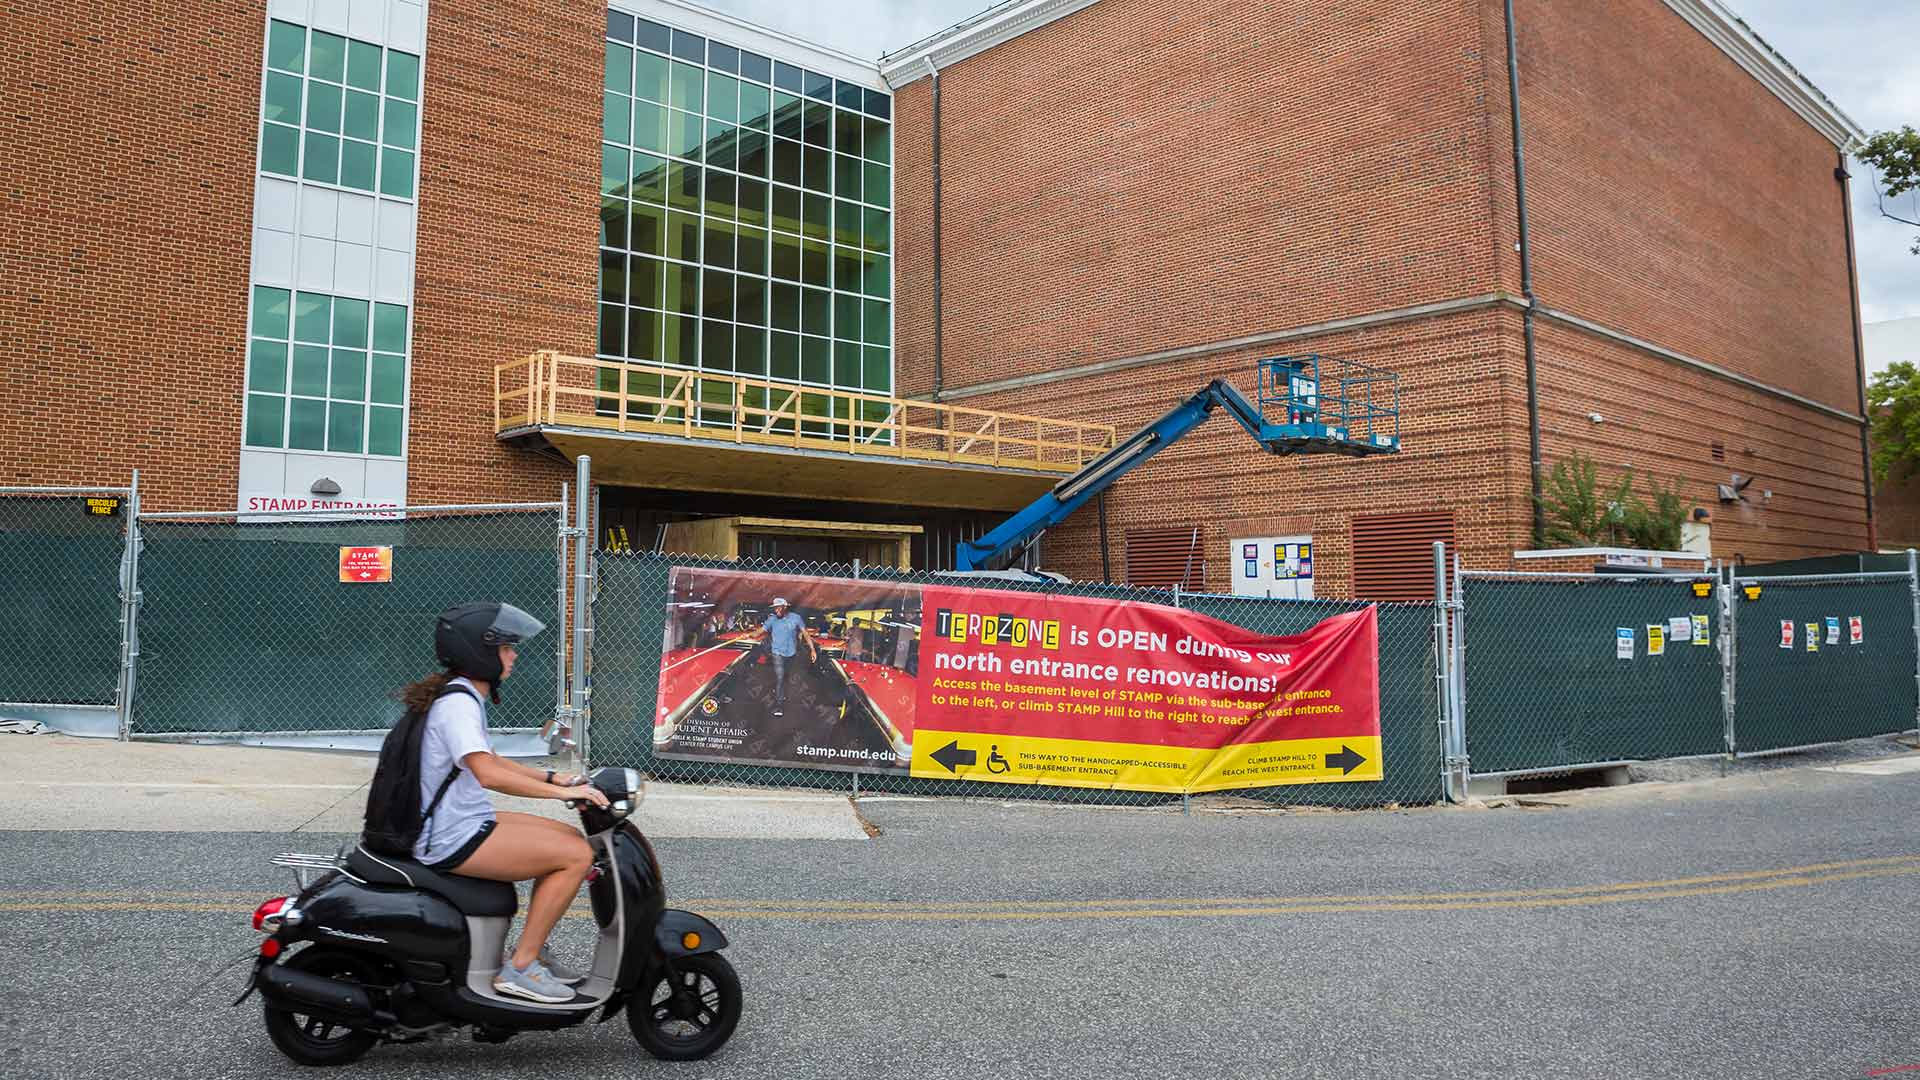 Construction at the Stamp Student Union at UMD